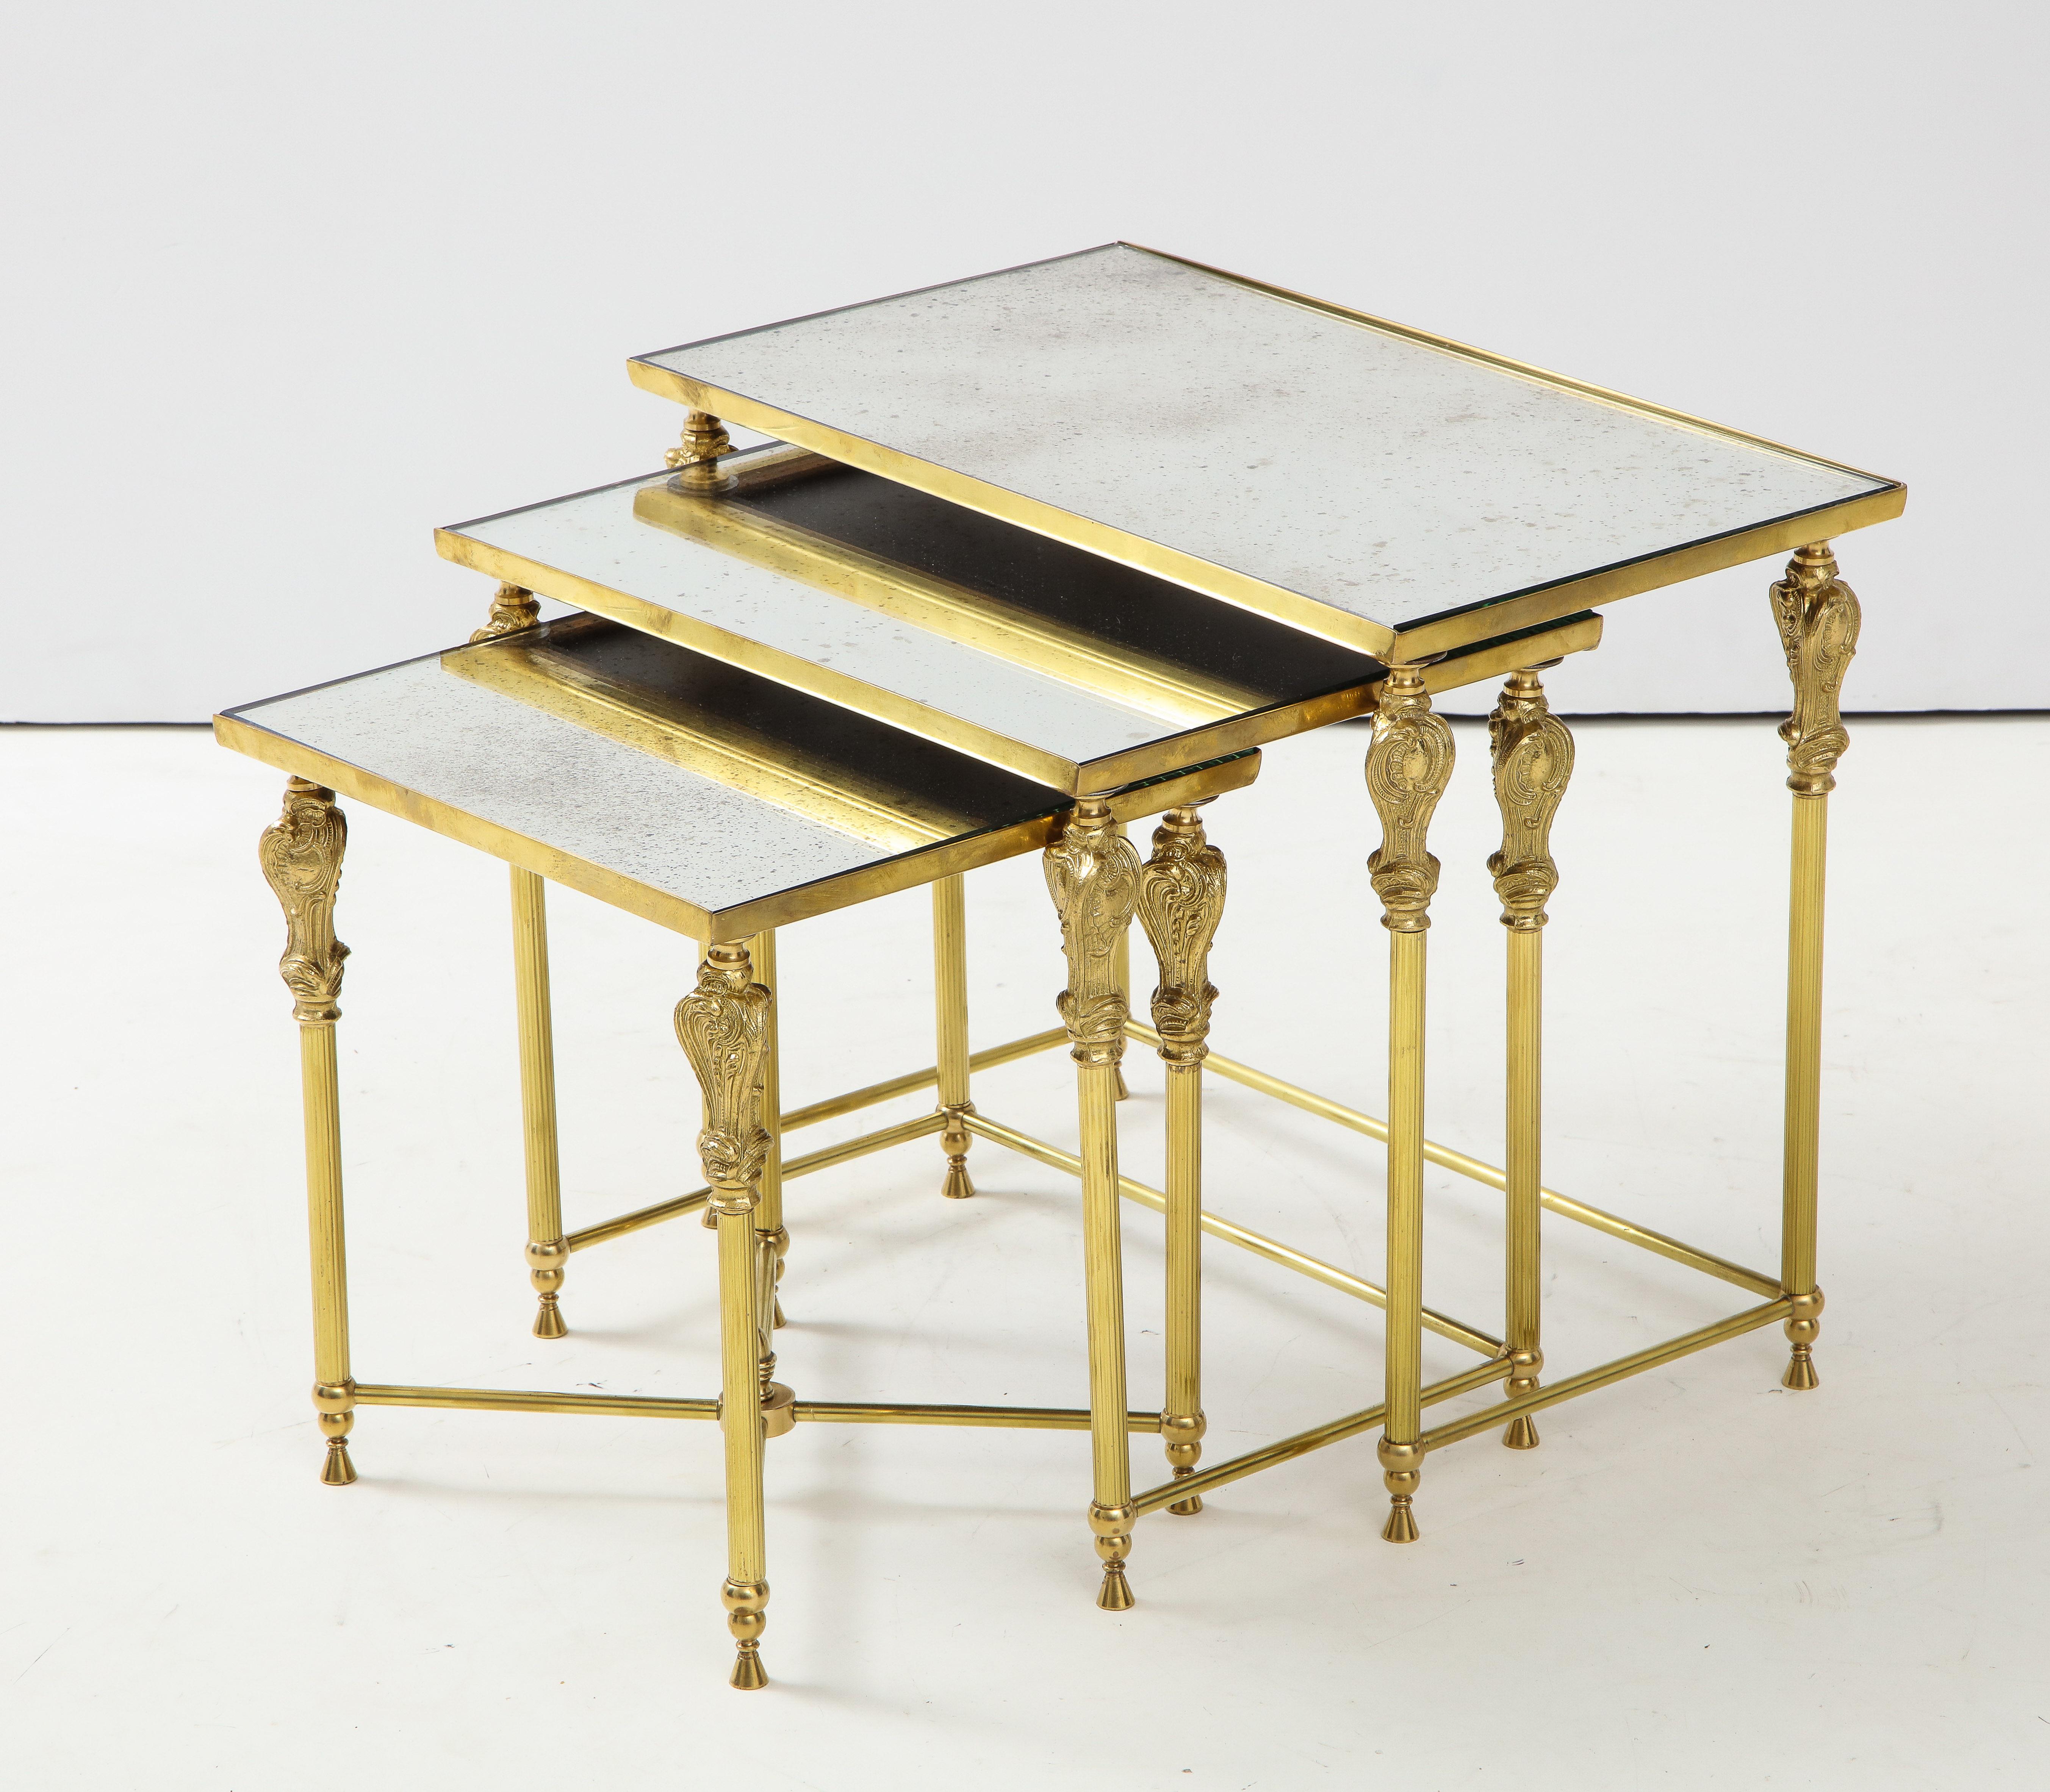 Stunning set of 1950s French bronze and brass nesting tables with glass inserts. 

Measures: Medium table width 18”, depth 12”, height 15.75
Small table width 18 depth 12”, height 14.50”.